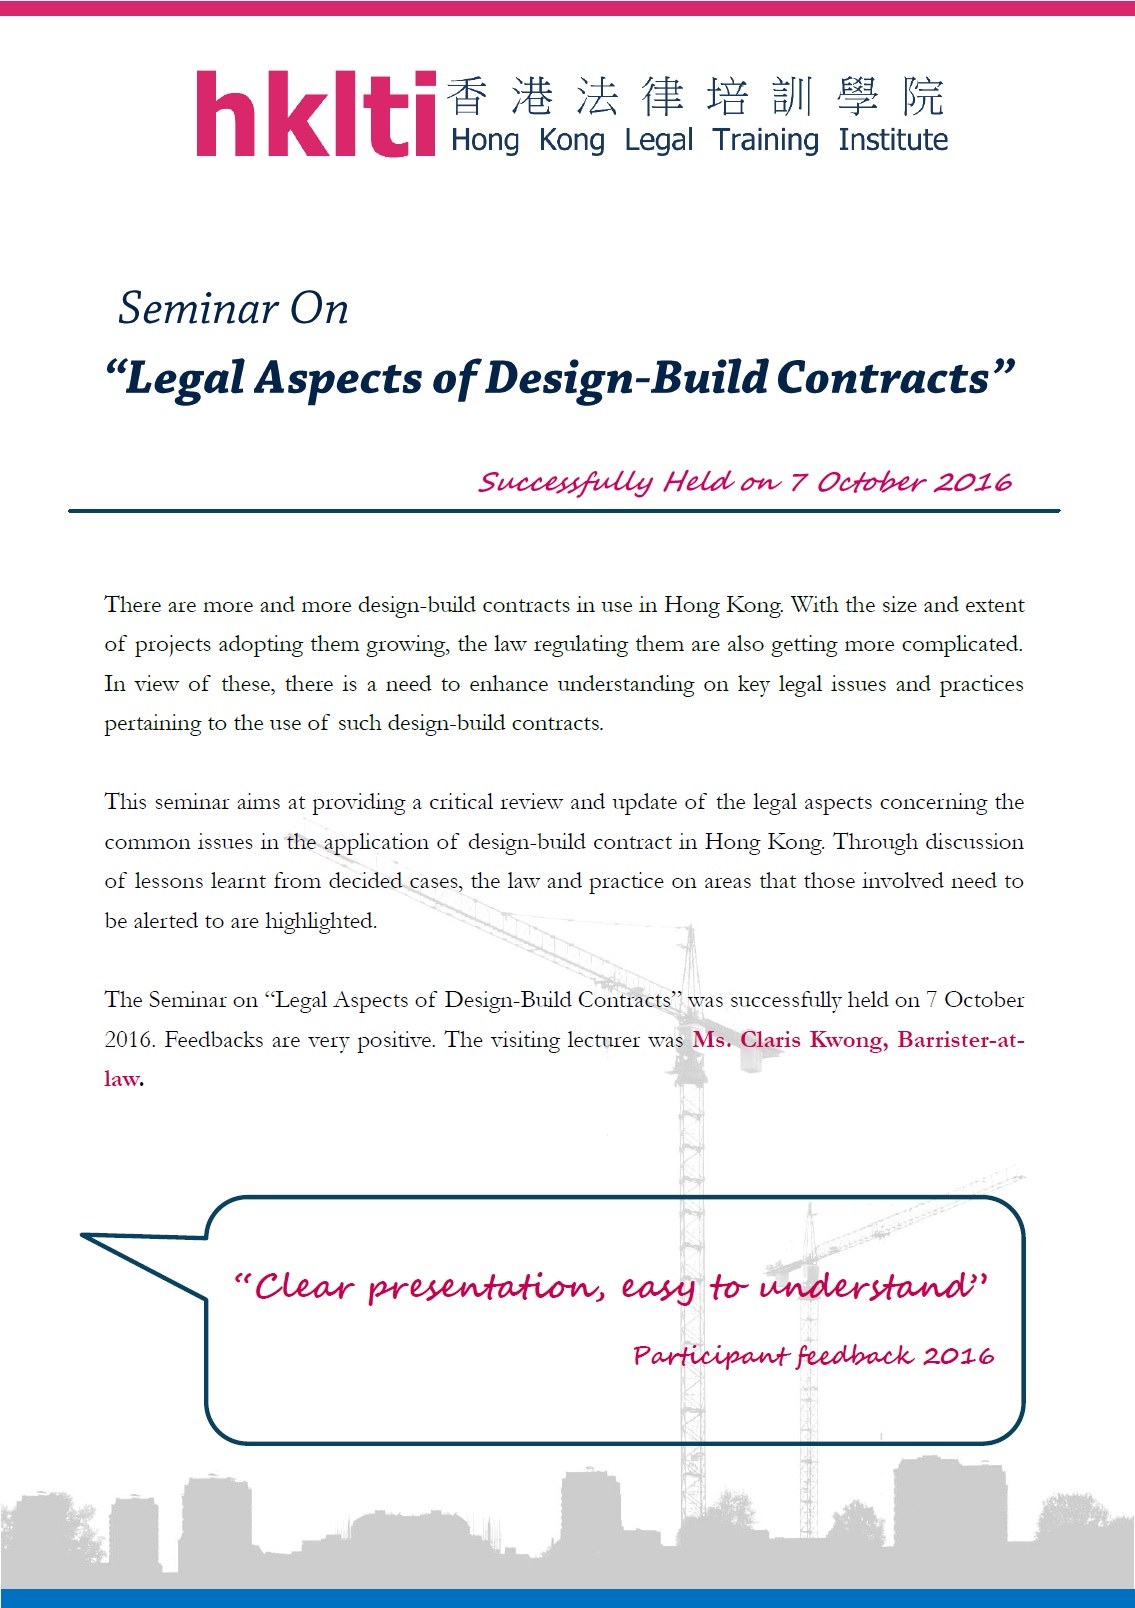 hklti hkie legal aspects of design build contracts seminar report 20161007